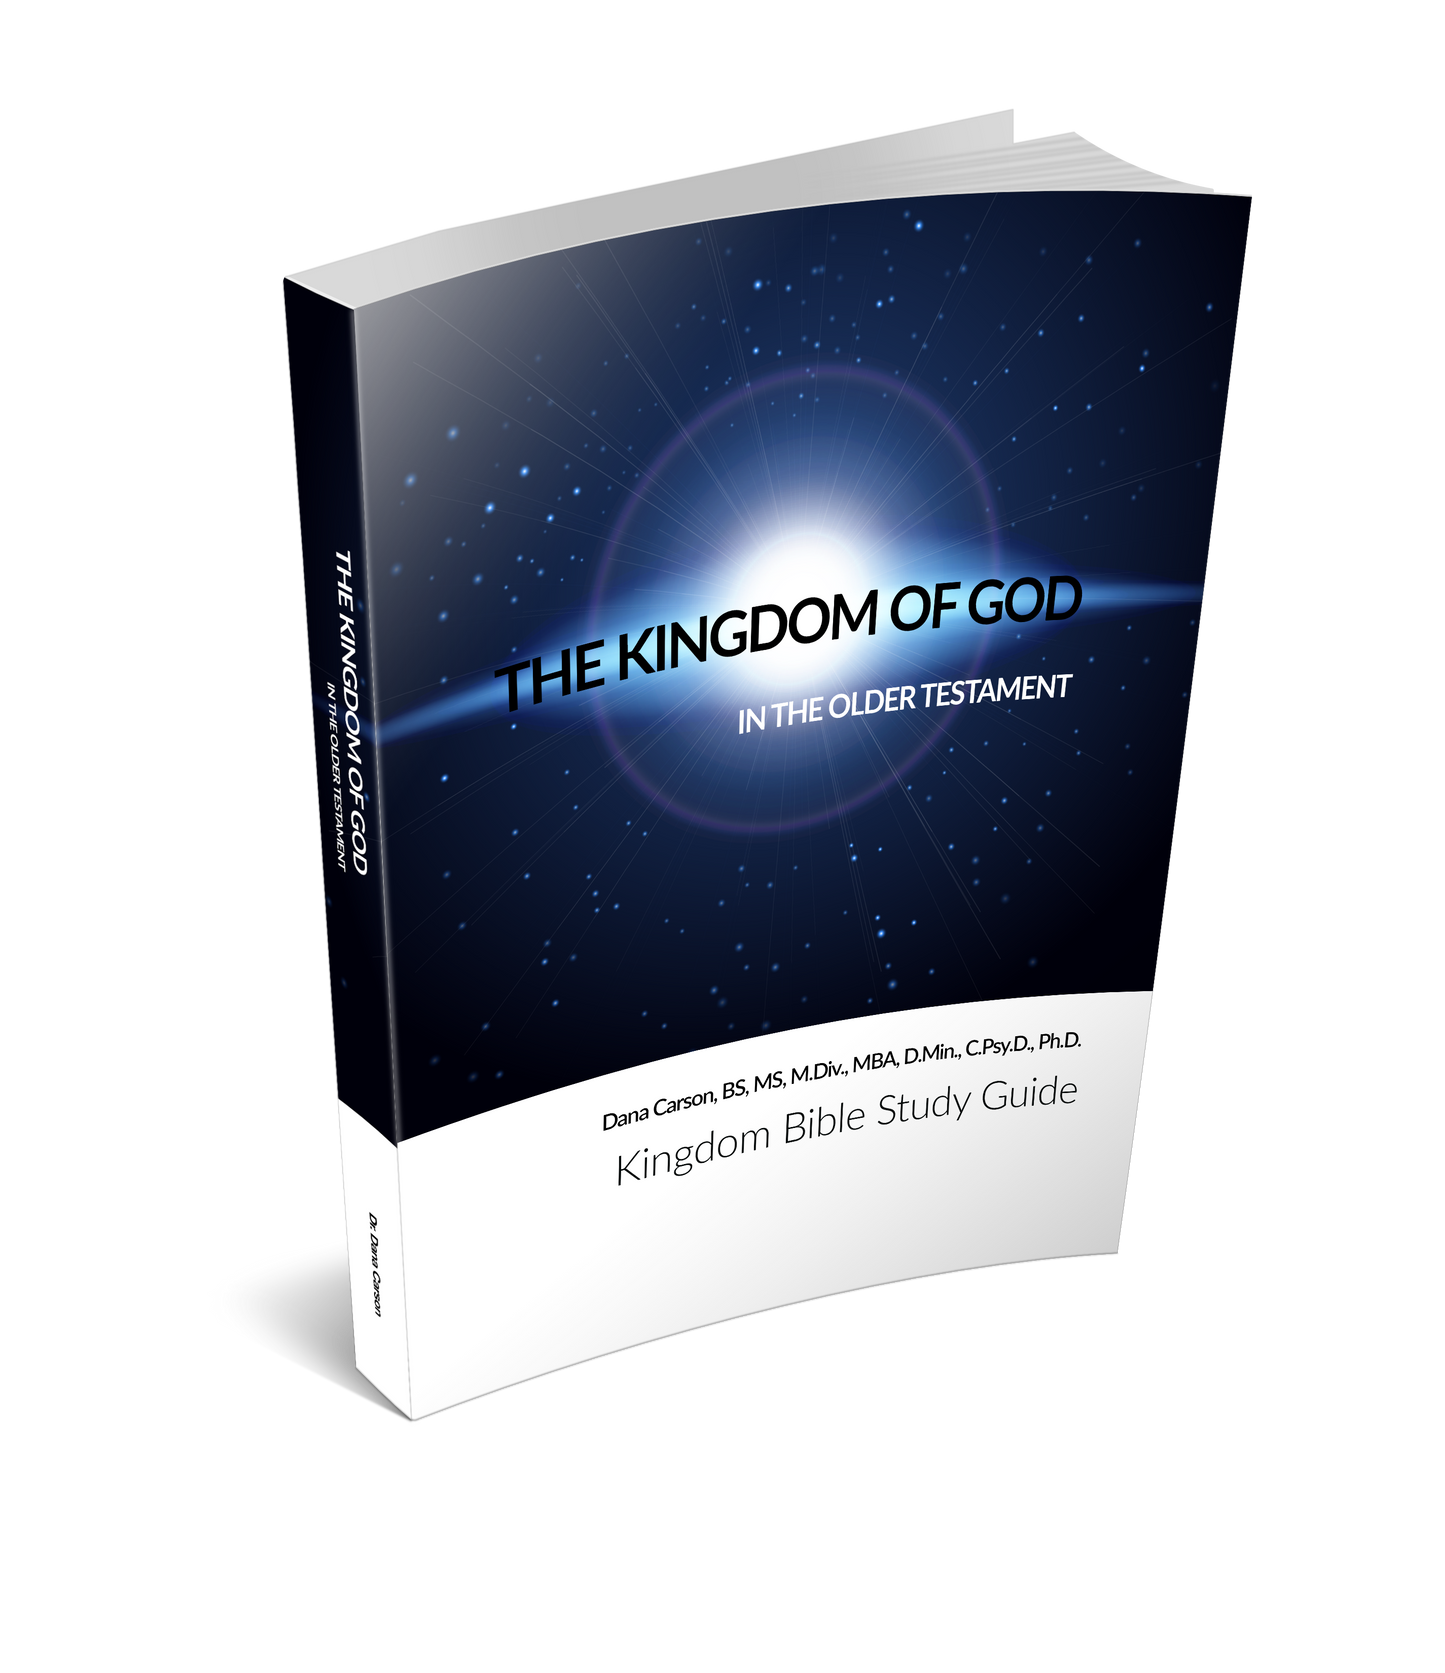 The Kingdom of God in the Older Testament Kingdom Bible Study Guide